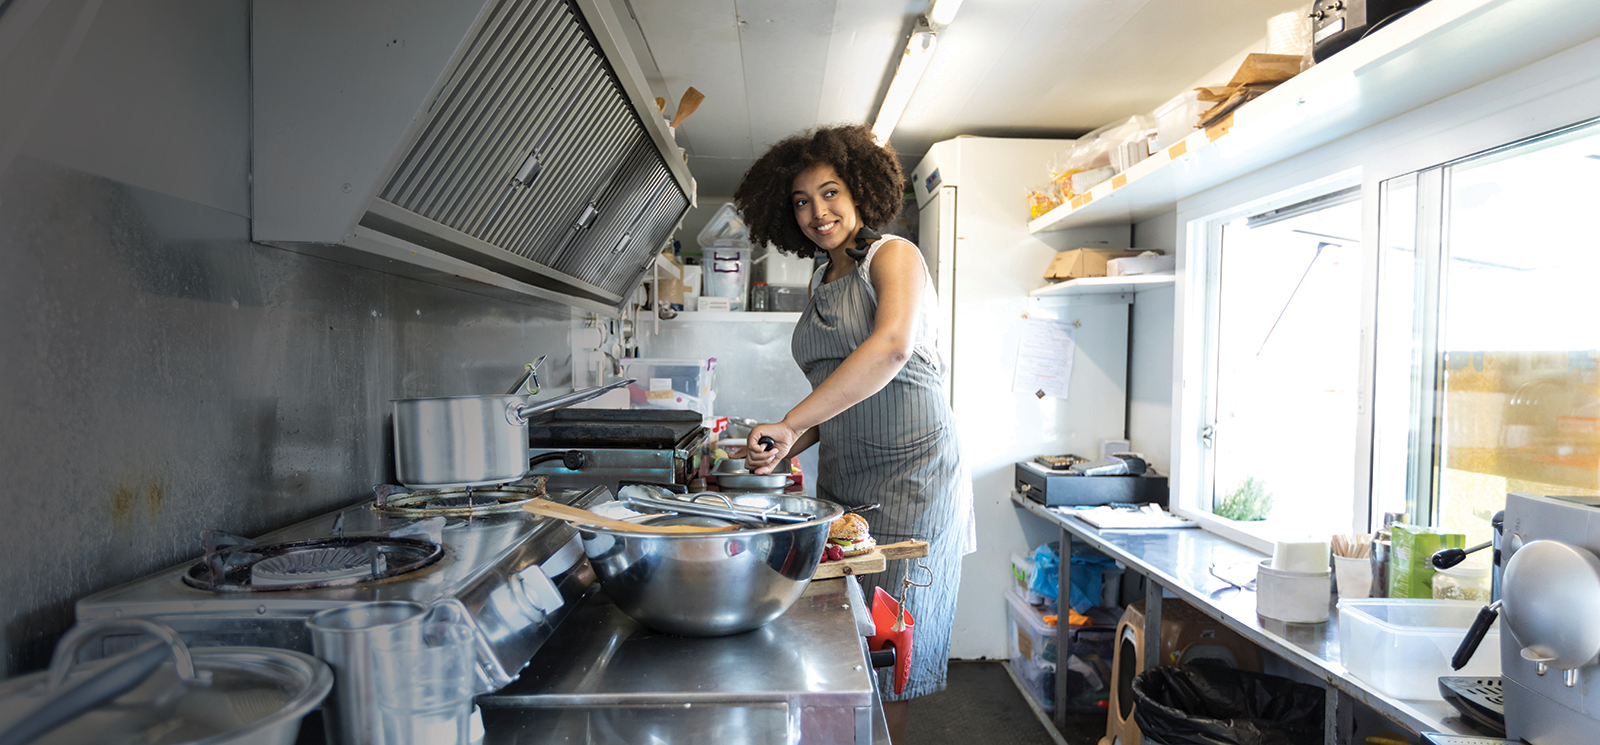 IMAGE: Woman cooking inside food truck